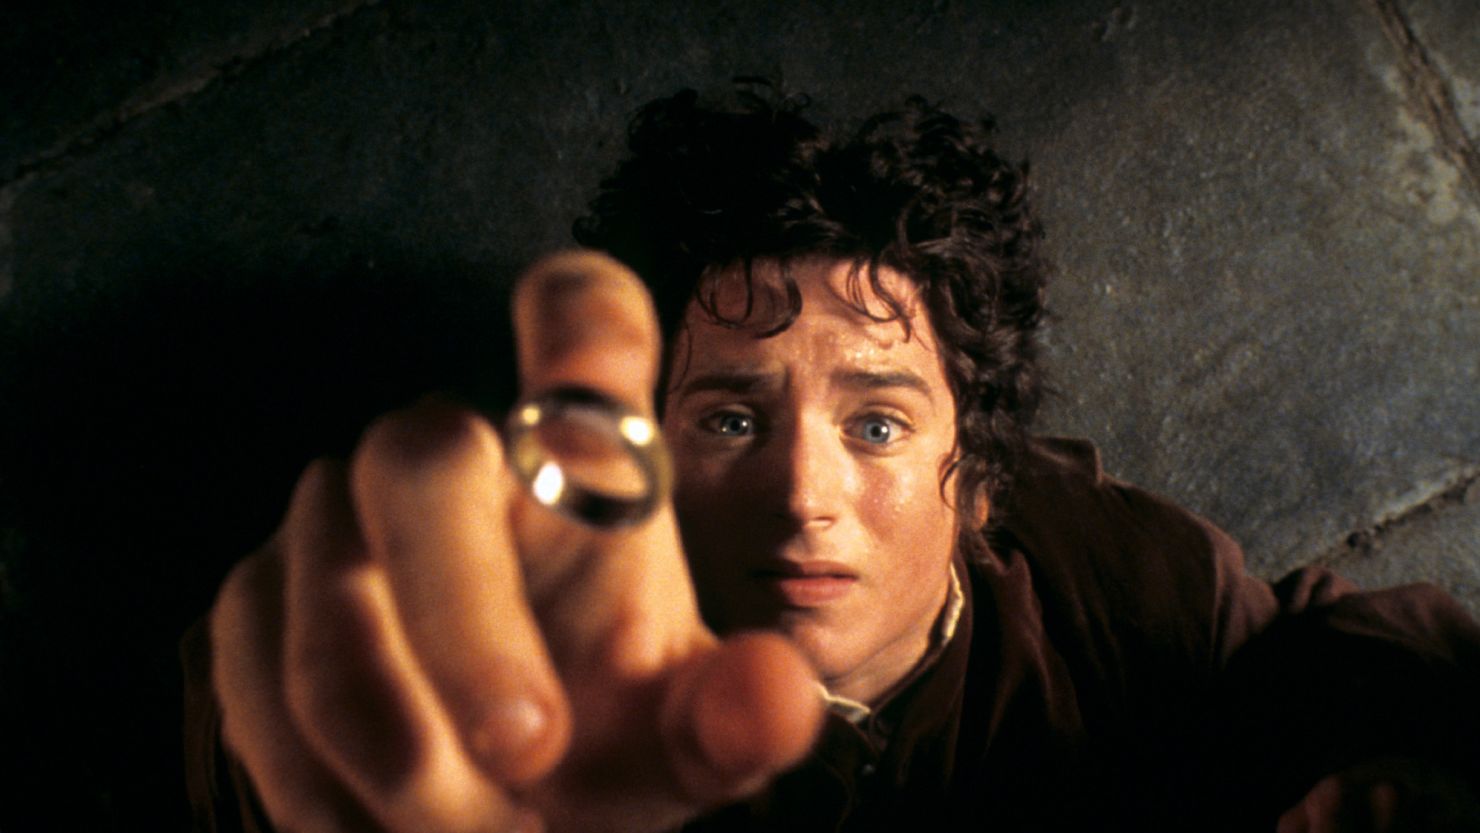 New 'Lord of the Rings' movie series in the works at Warner Bros